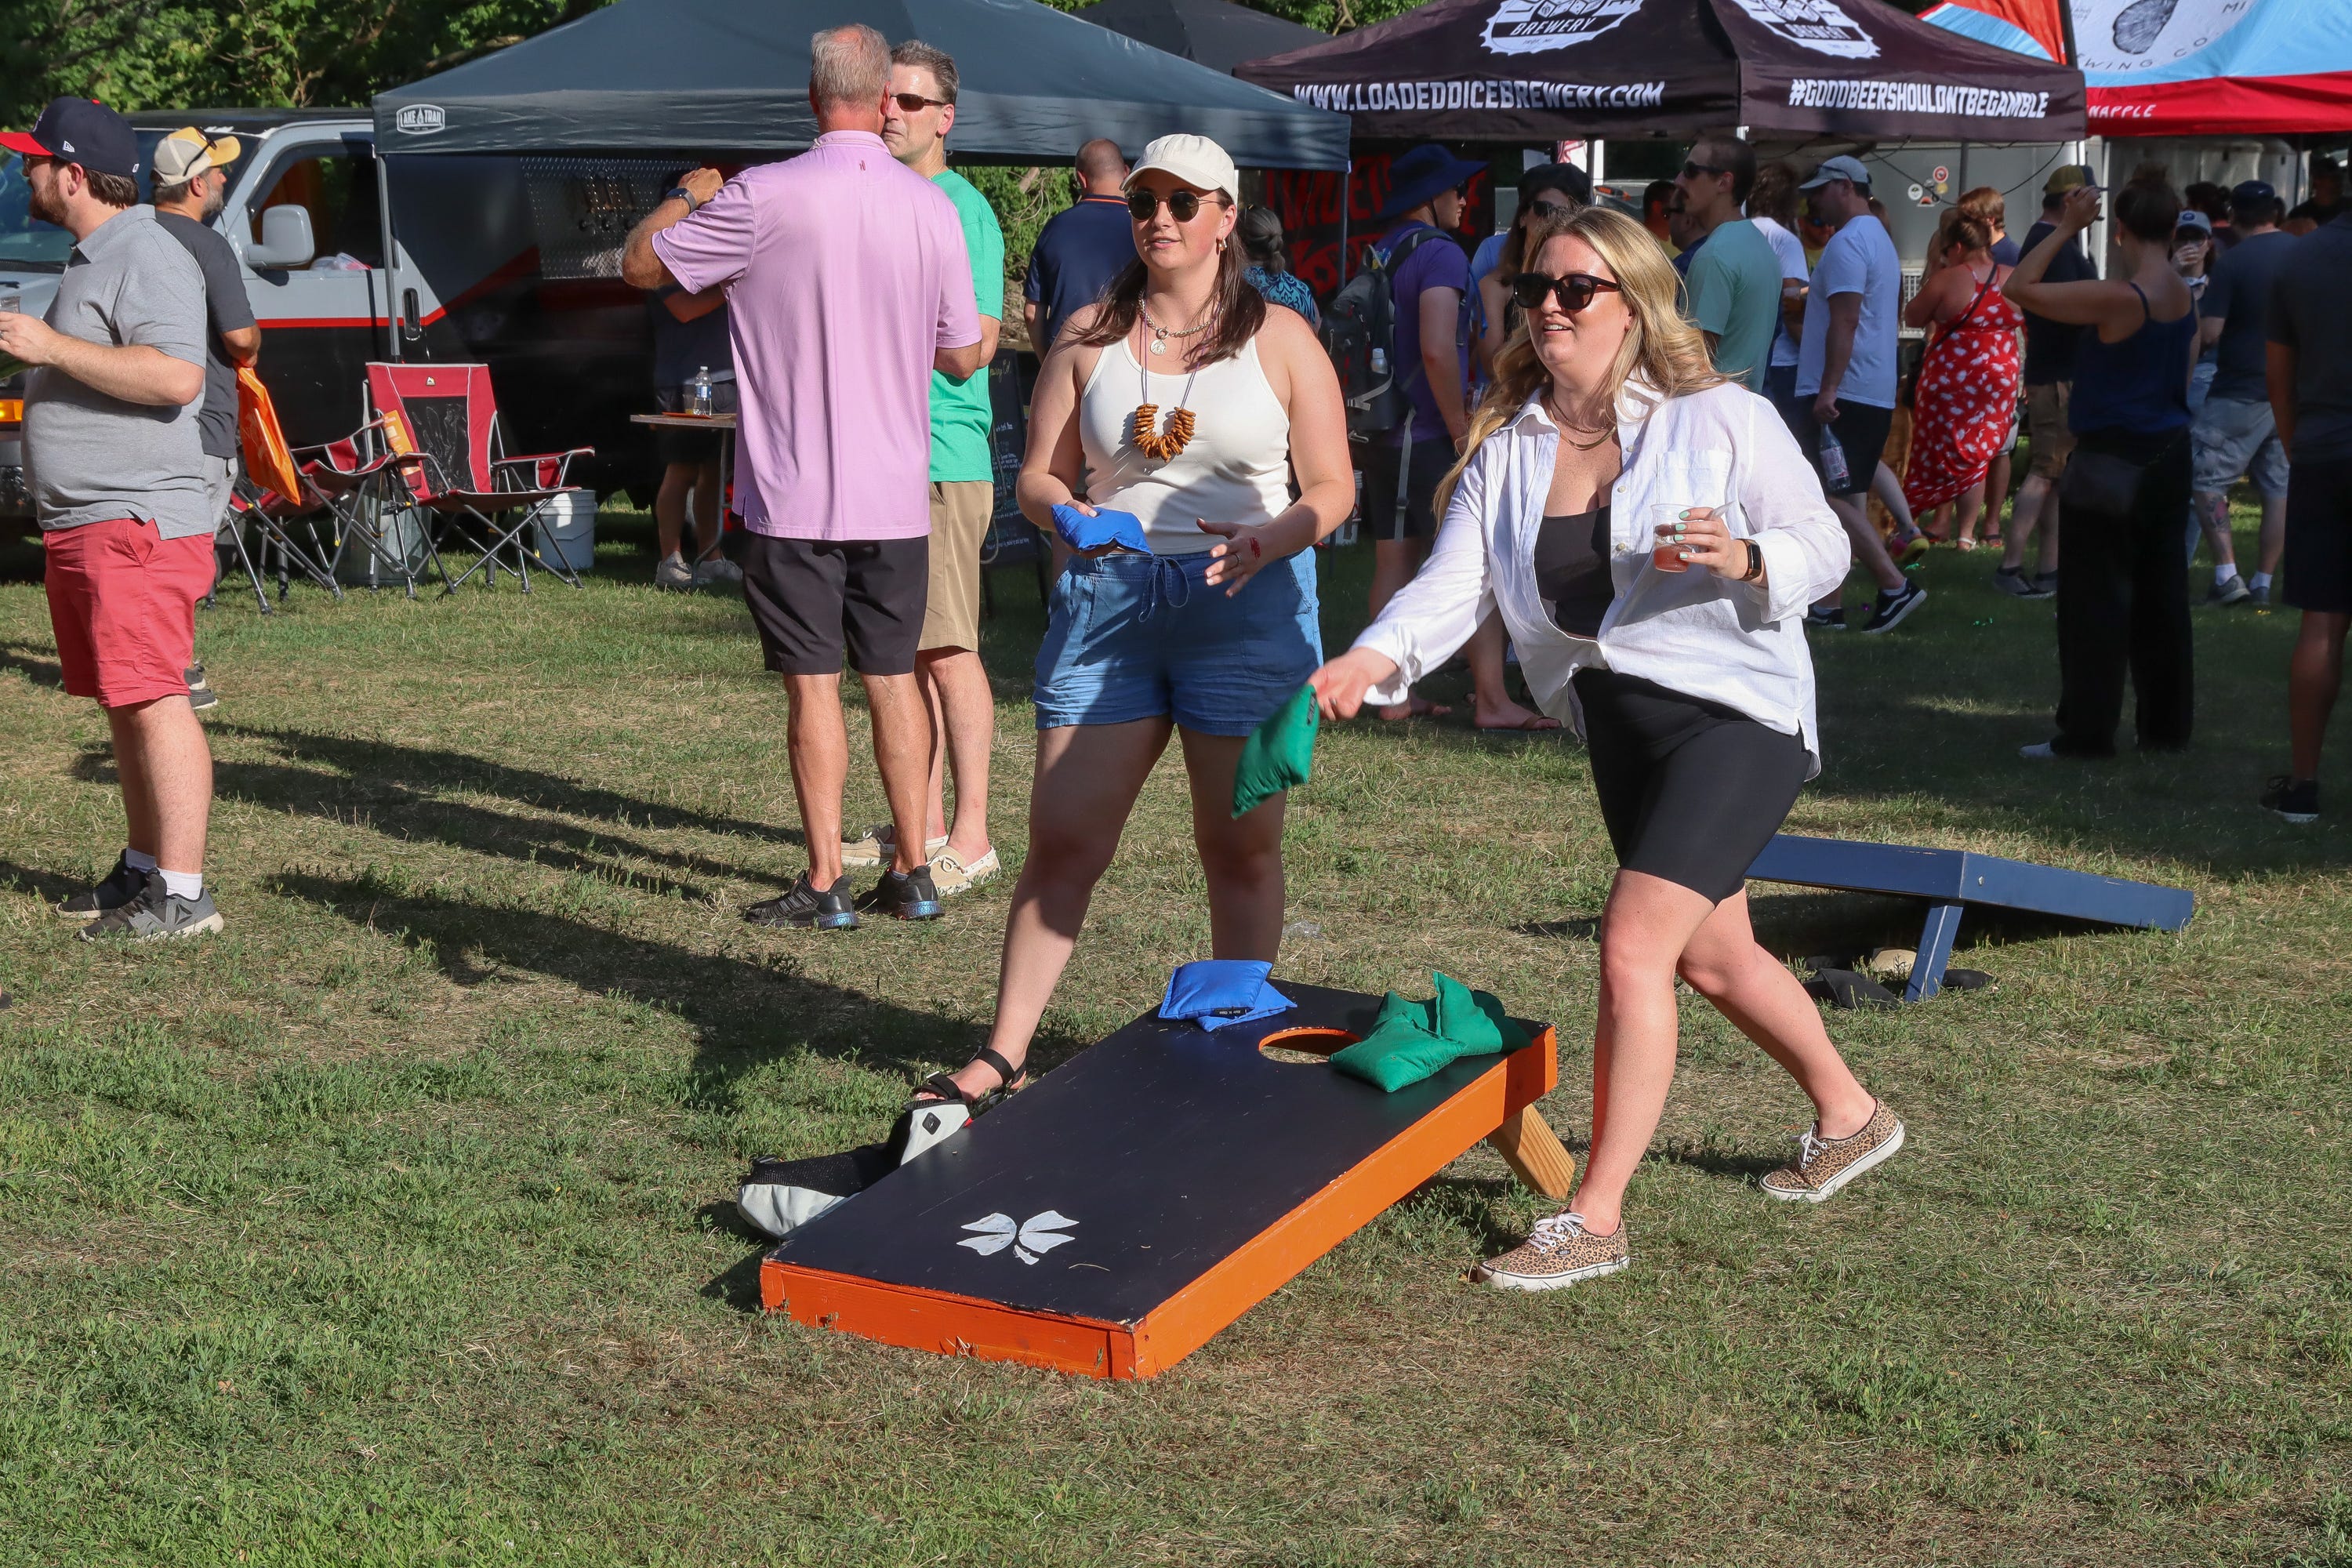 Maddie Davis, of Ann Arbor, looks on as Heather Dangel, of Livonia, tosses a cornhole bag at the New Holland Brewing area at the Michigan Brewers Guild Summer Beer Festival Friday in Ypsilanti's Riverside Park. Dangel doesn't spill a drop.